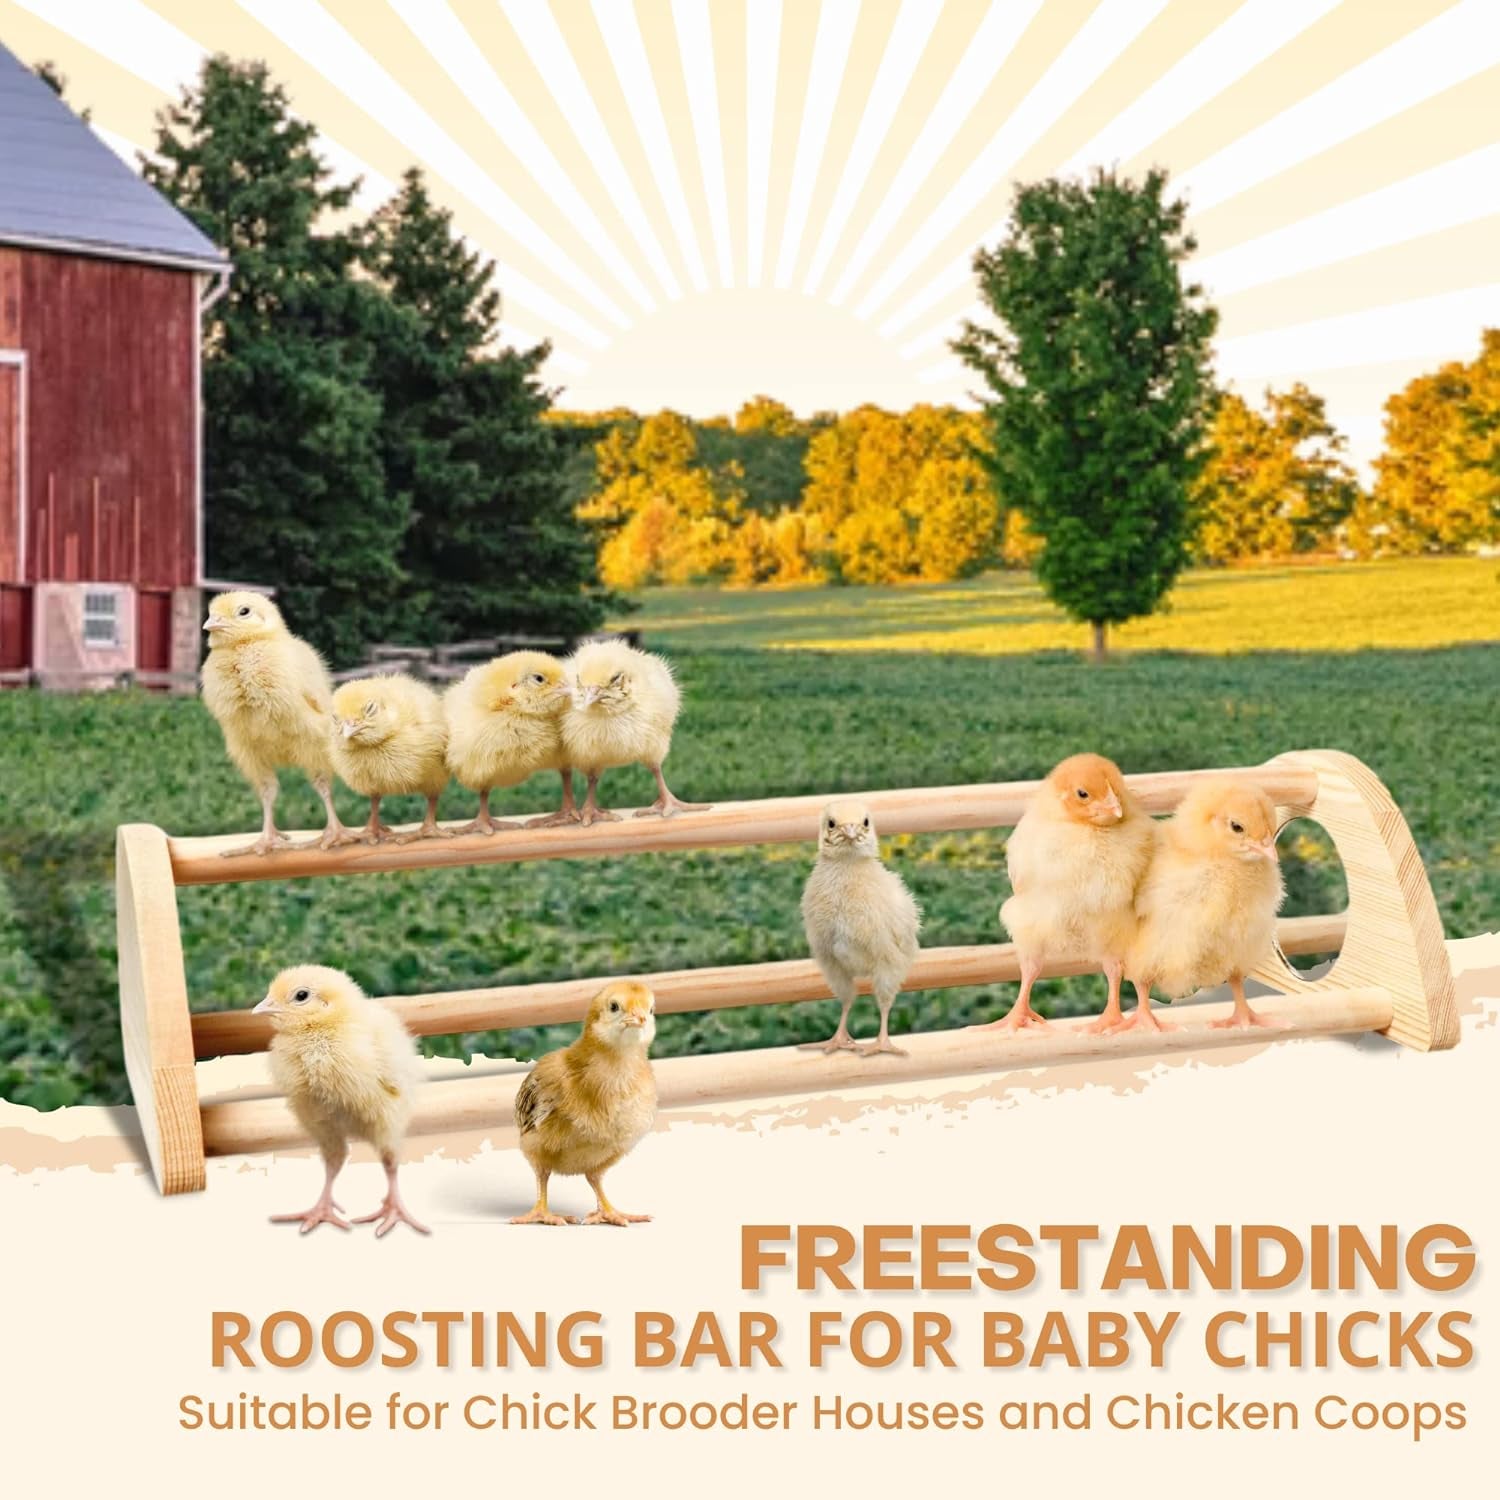 16" Extra Long Chicken Perch - Freestanding Roosting Bar for Baby Chicks with Built-In Mirrors for Entertainment - Durable Polished Bamboo Roosting Bar - 15 3/4 X 6 5/8 X 3 1/2"